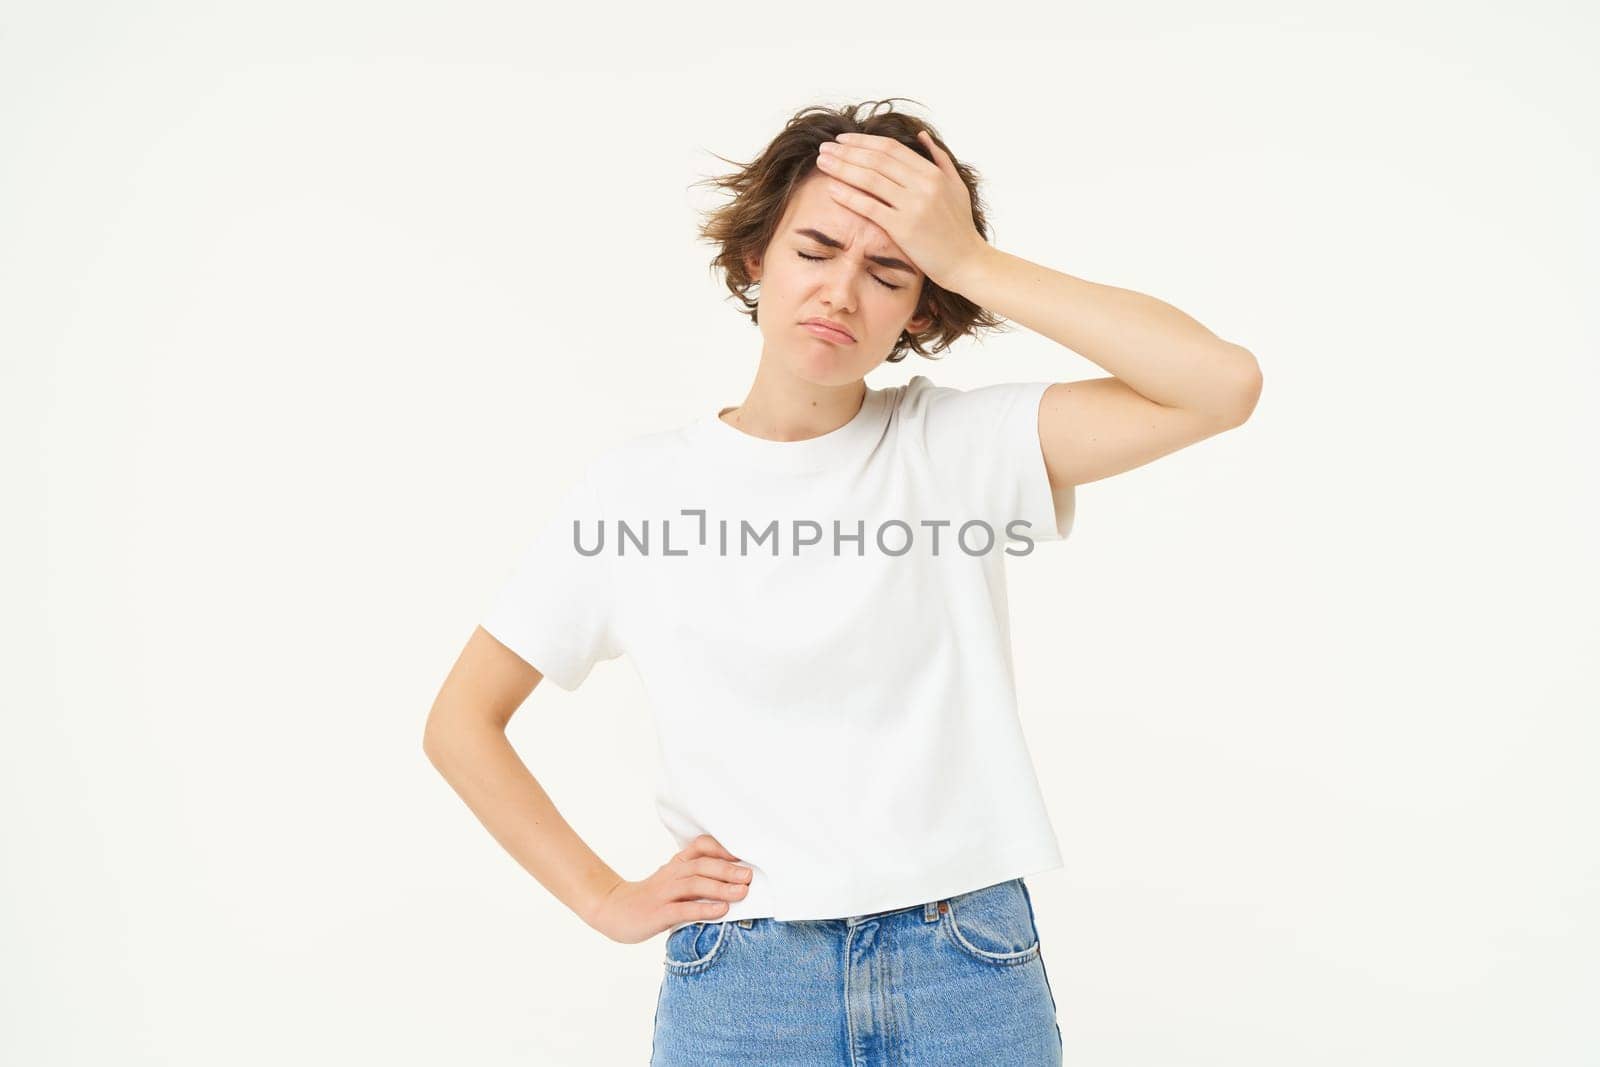 Health and people. Young woman has headache, touches her head and grimacing from painful migraine, feeling unwell, dizzy, standing over white background.